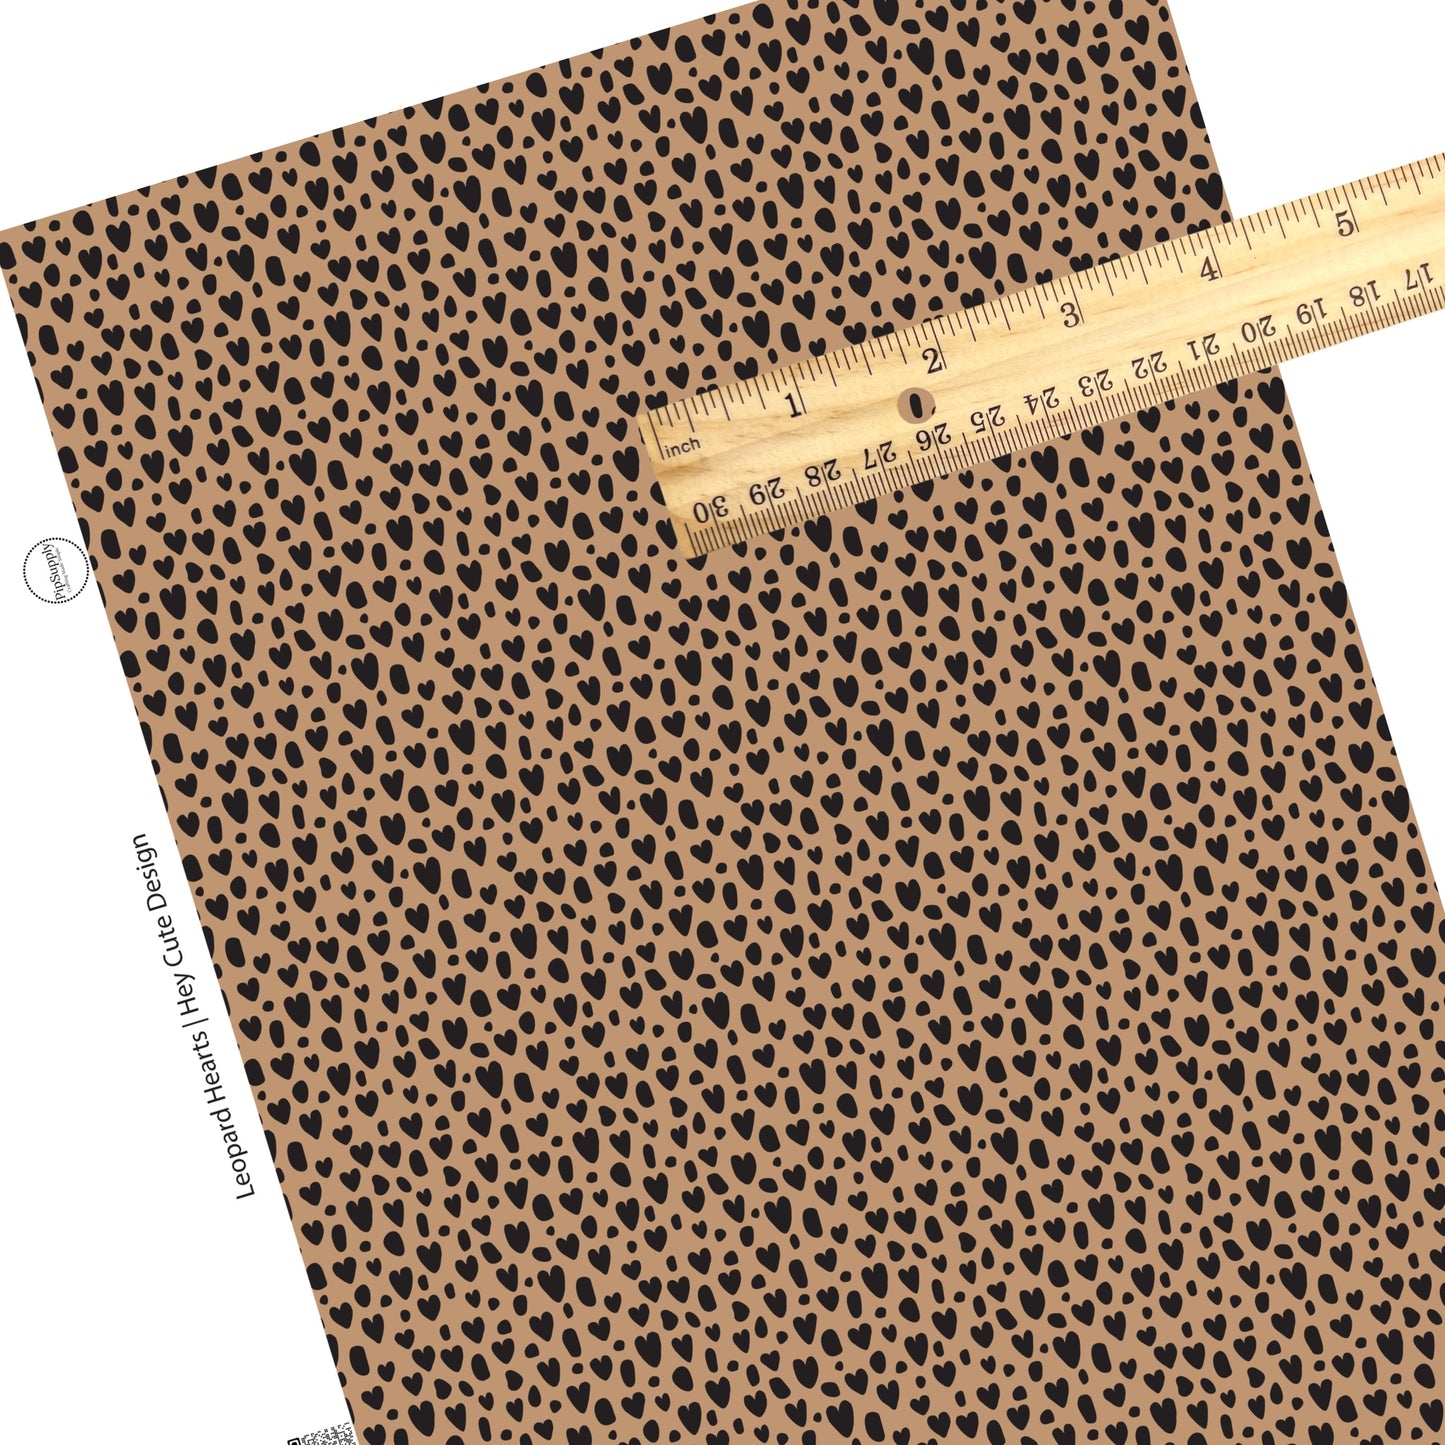 These heart and spot themed brown faux leather sheets contain the following design elements: leopard pattern with hearts and spots in black on brown. Our CPSIA compliant faux leather sheets or rolls can be used for all types of crafting projects. 